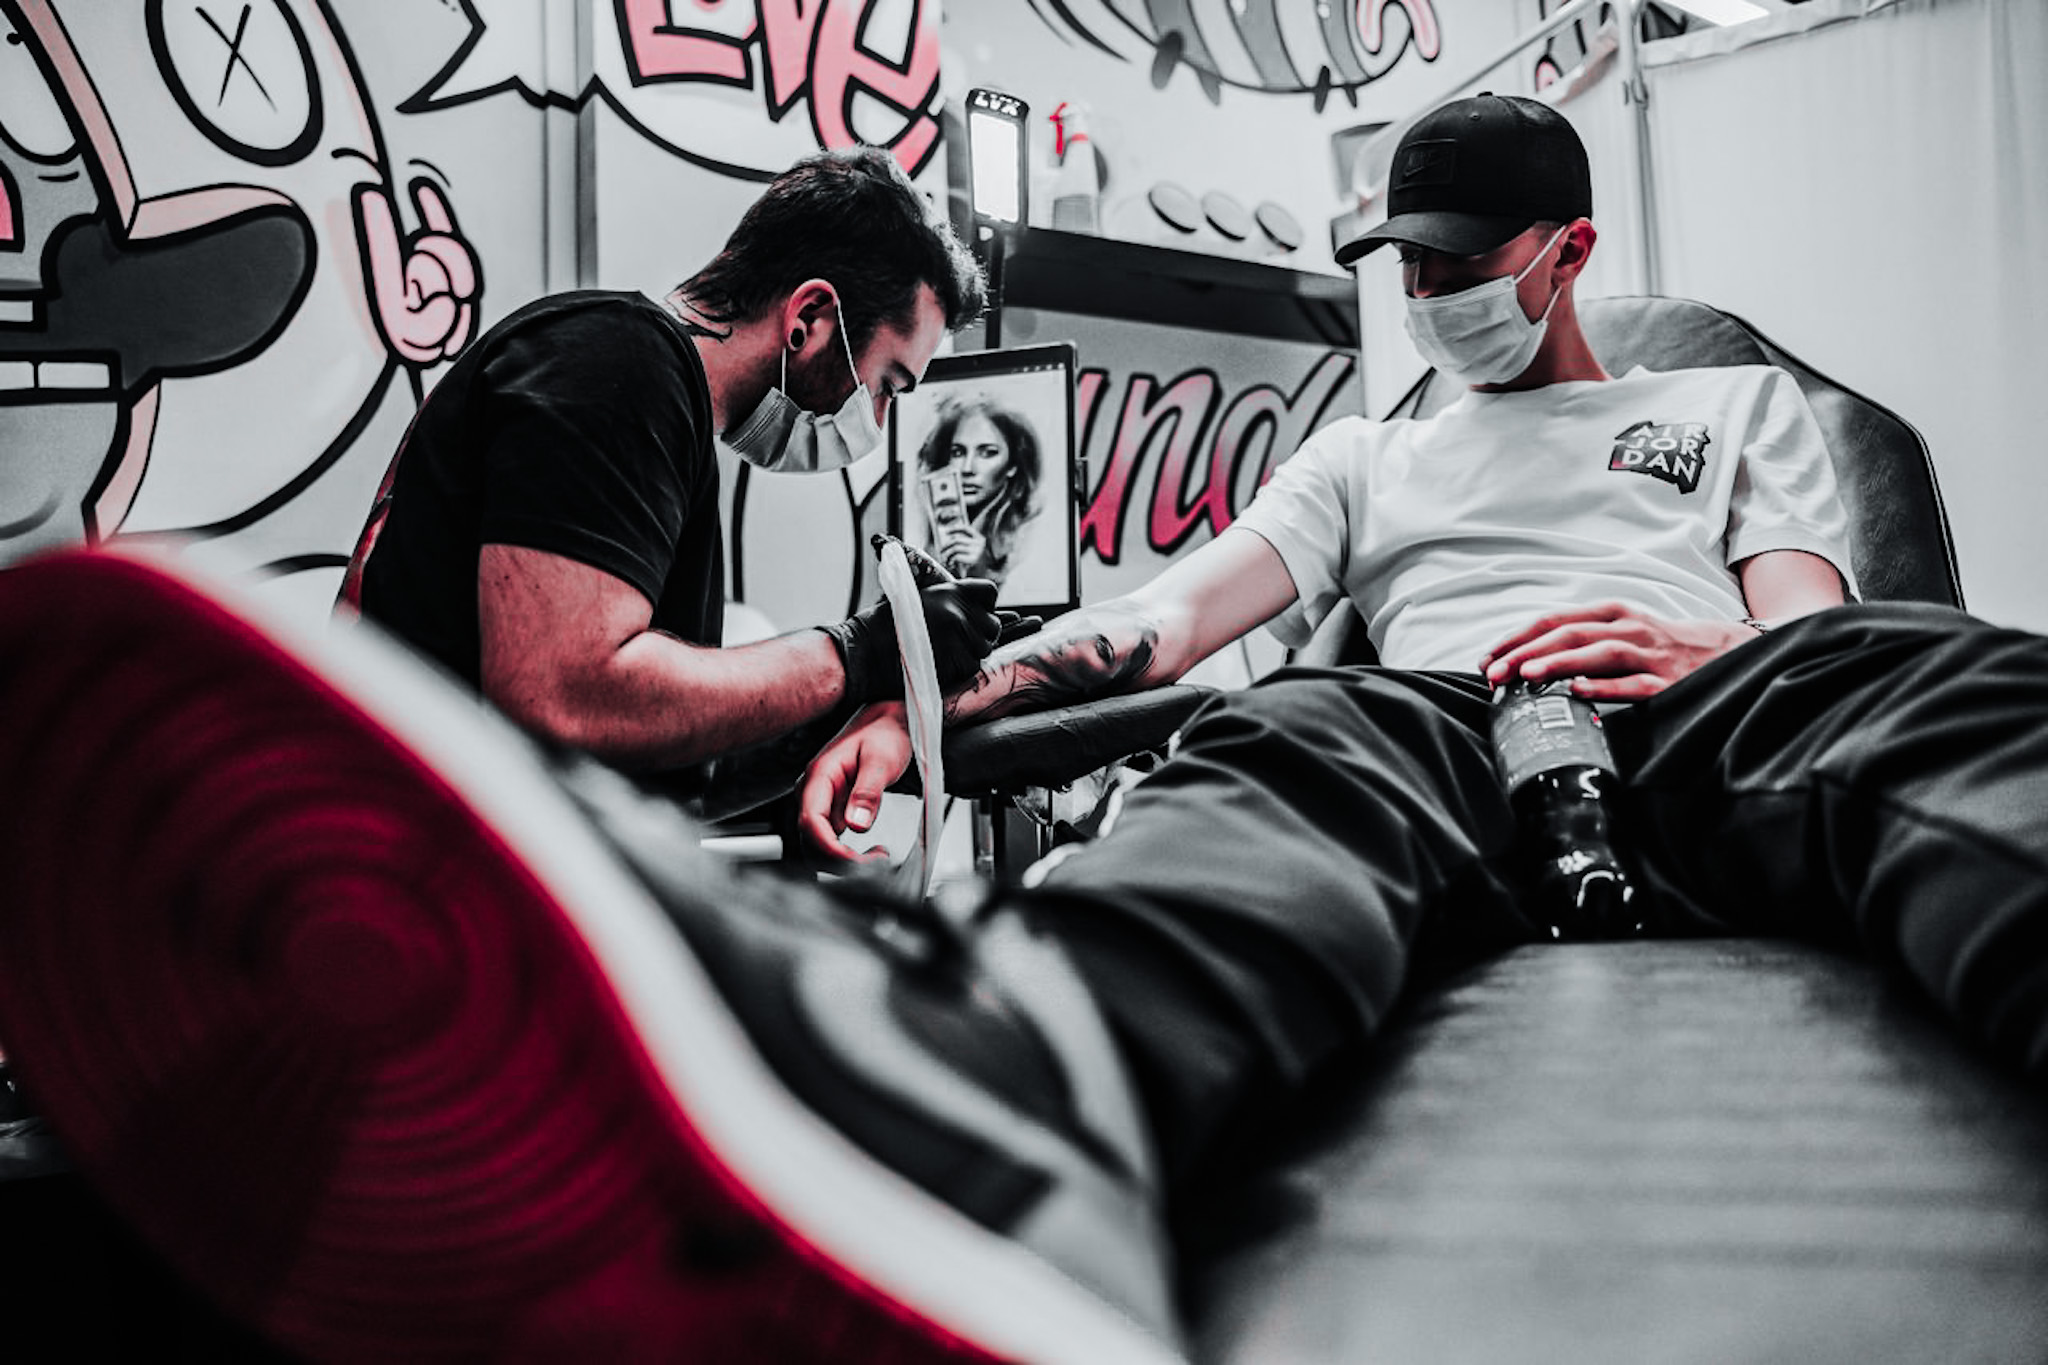 How to choose a tattoo shop and artist